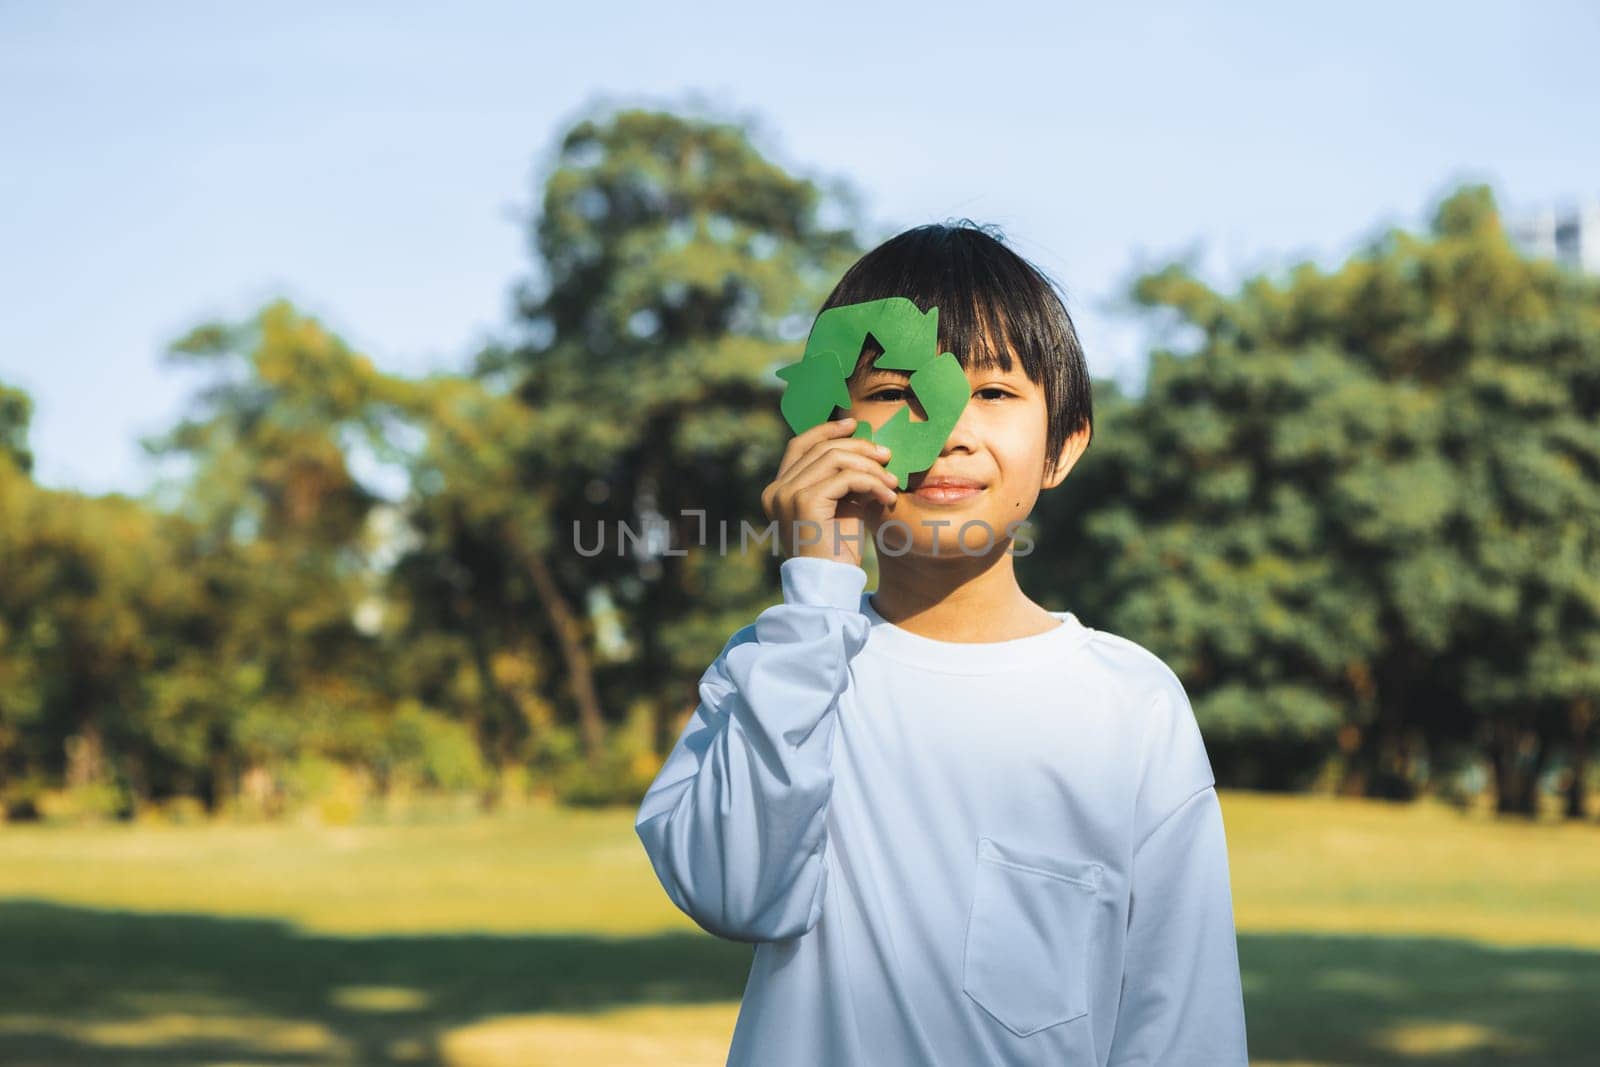 Cheerful young asian boy holding recycle symbol on daylight natural green park promoting waste recycle, reduce, and reuse encouragement for eco sustainable awareness for future generation. Gyre